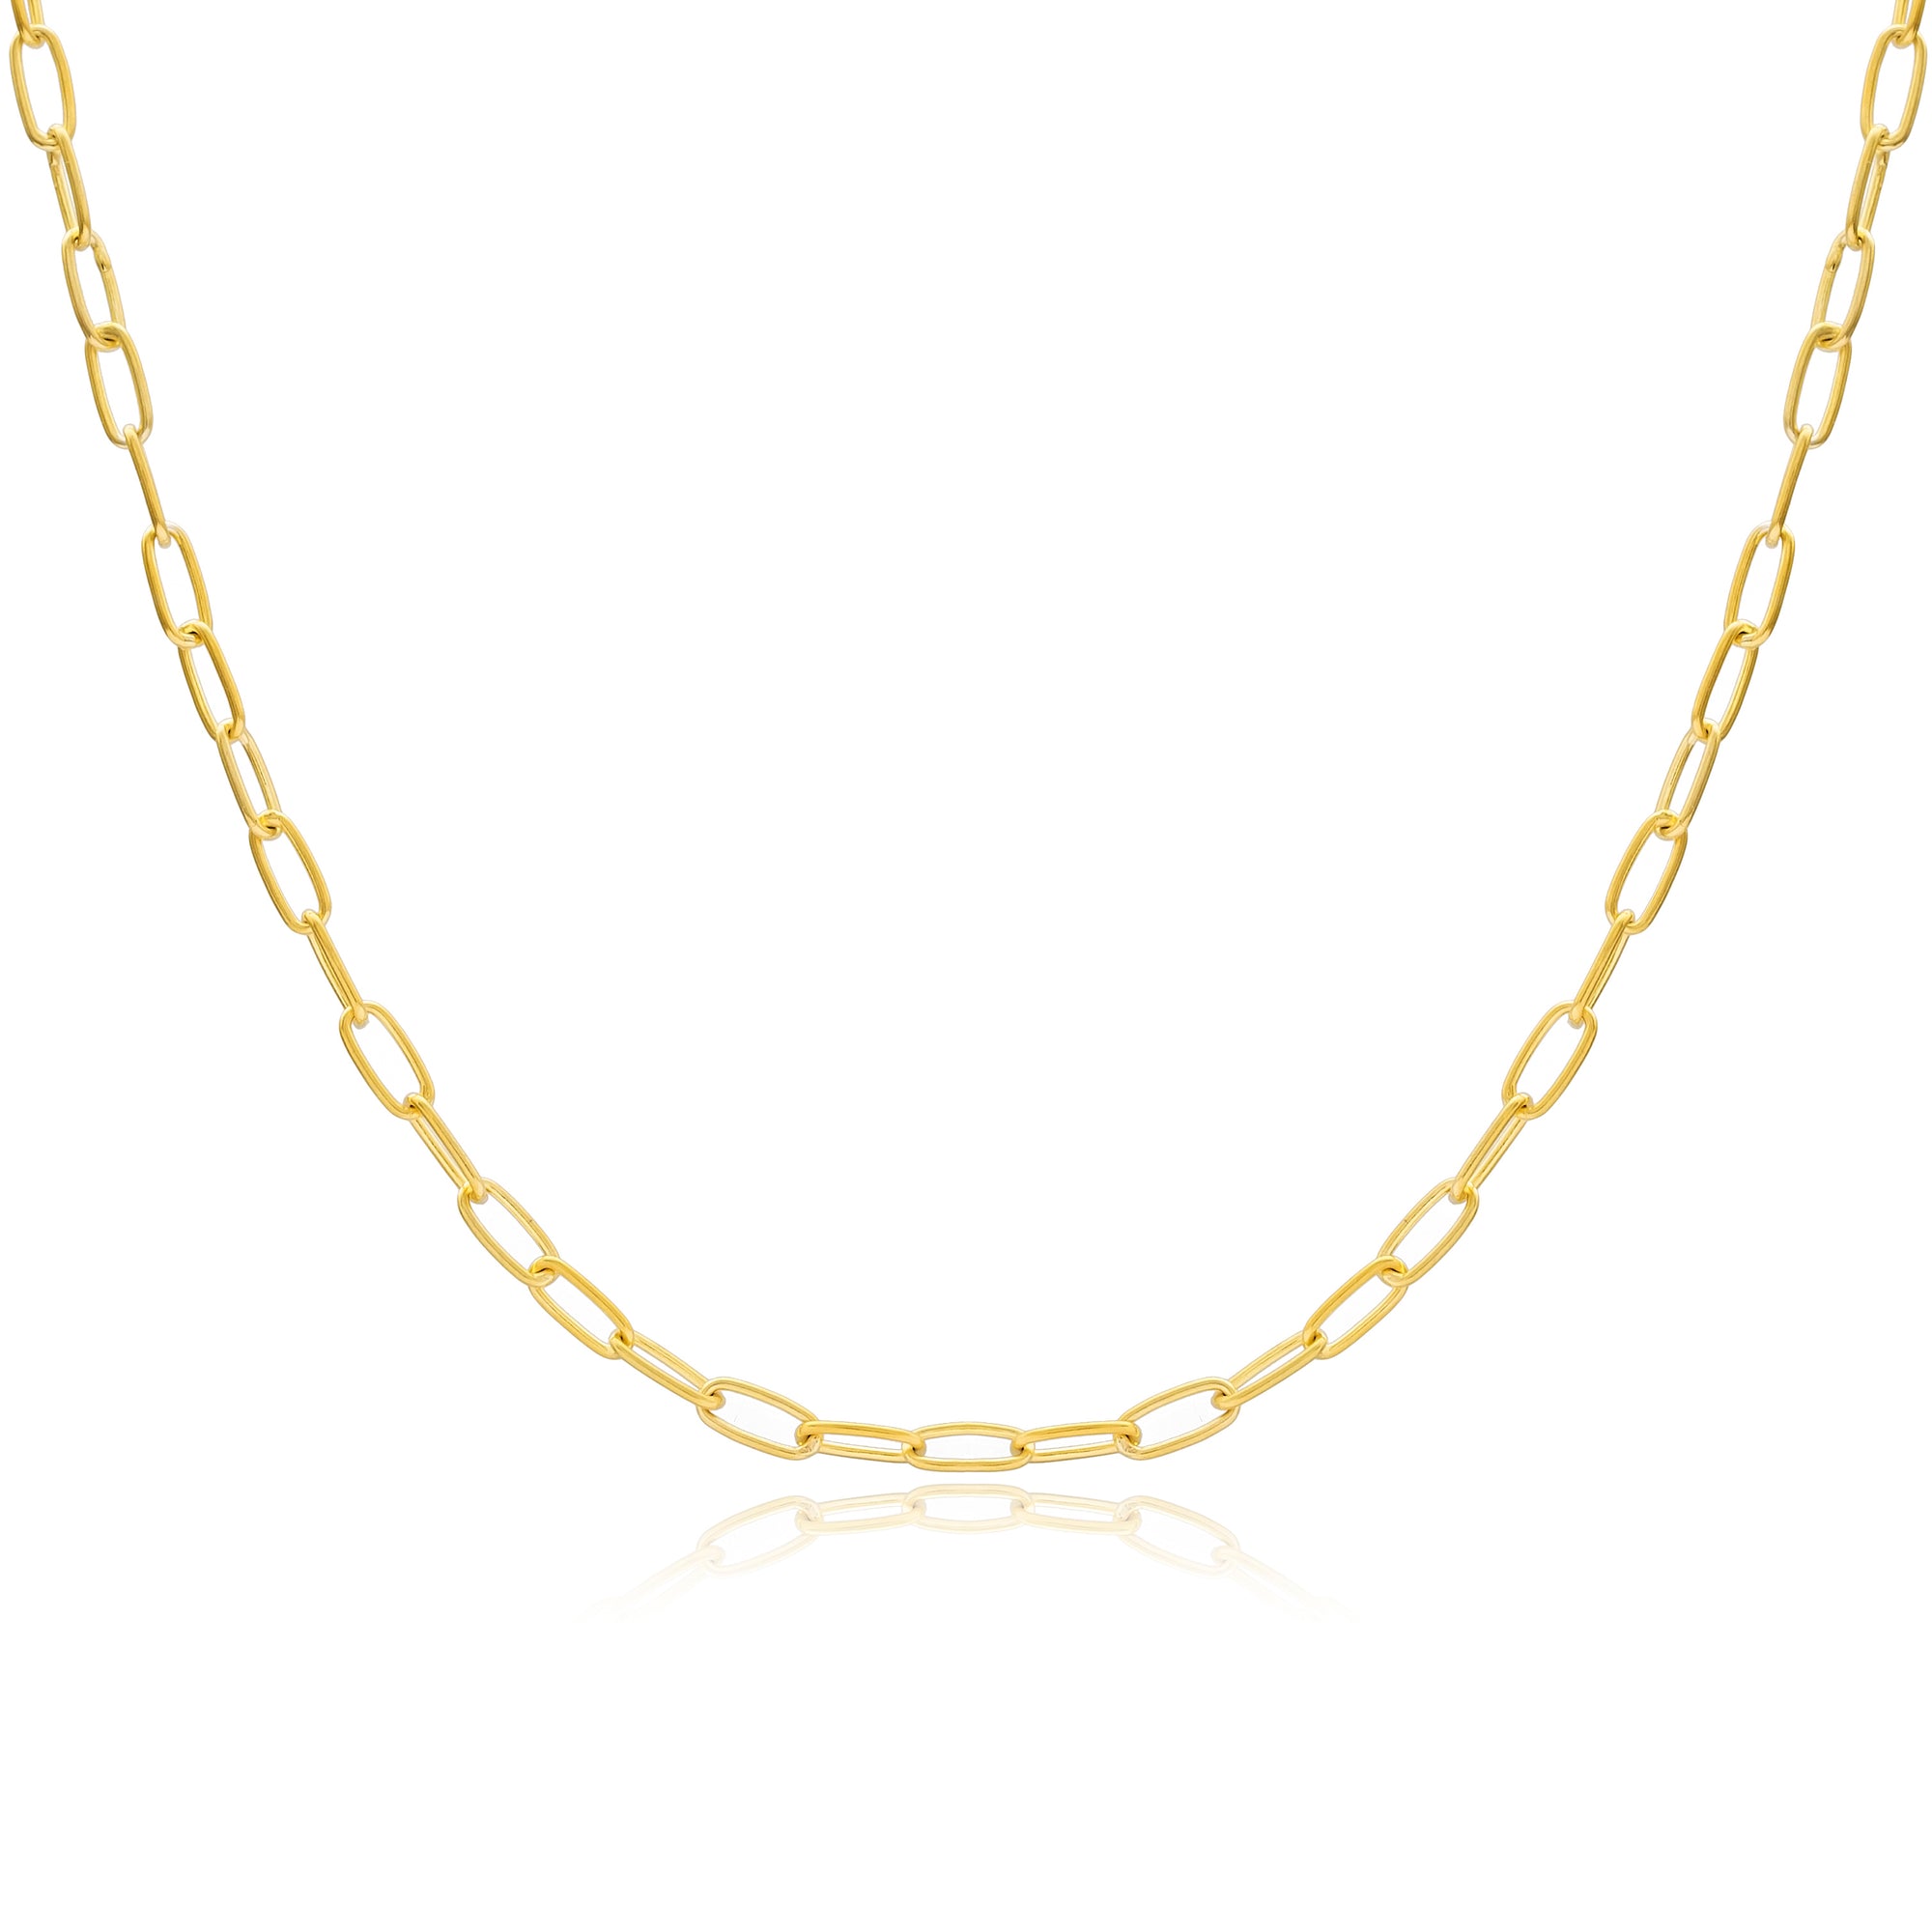 DIDO CHAIN - Sarah Stretton gold chain necklace stack